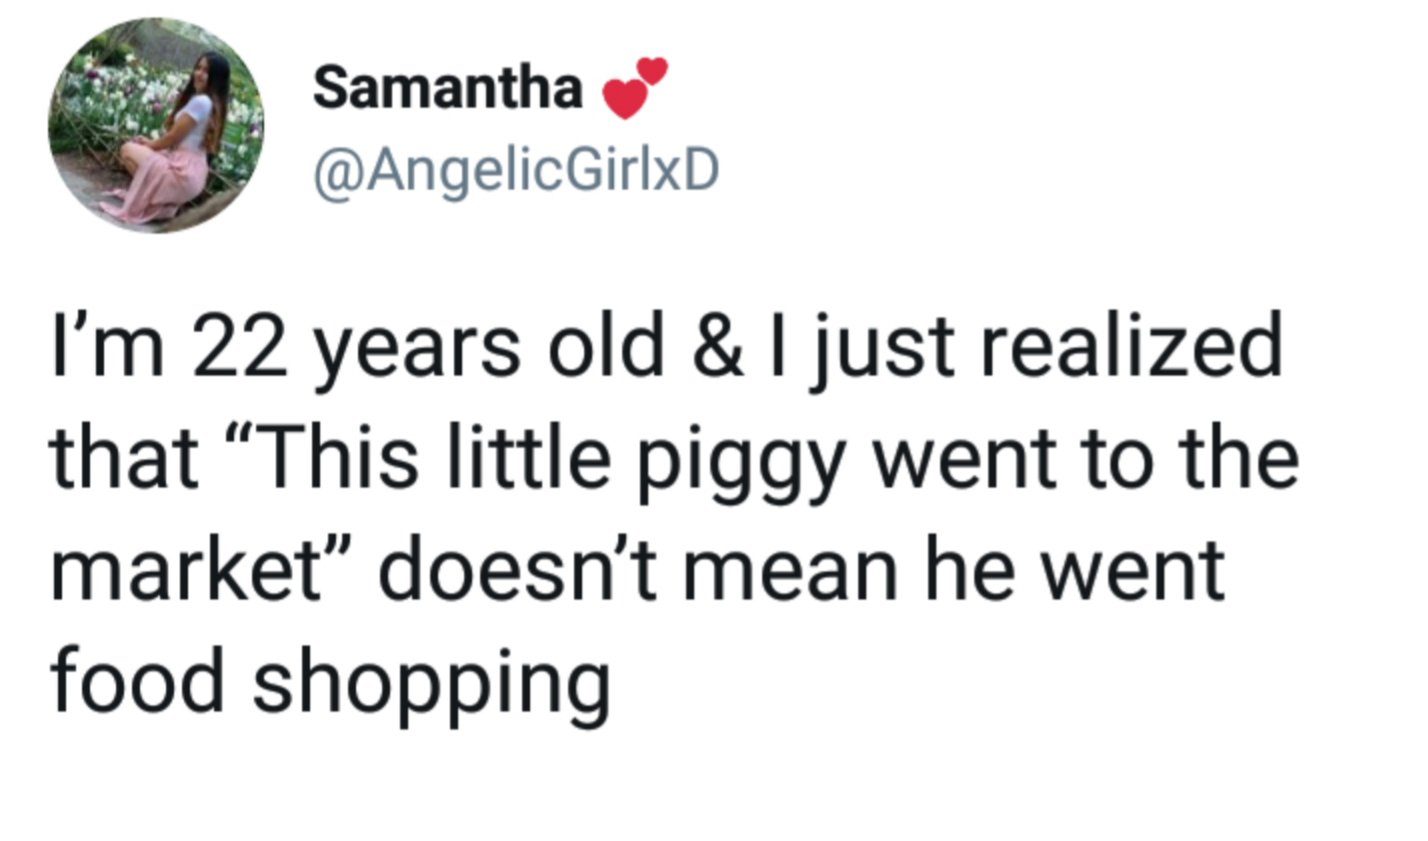 Samantha I'm 22 years old & I just realized that This little piggy went to the market" doesn't mean he went food shopping